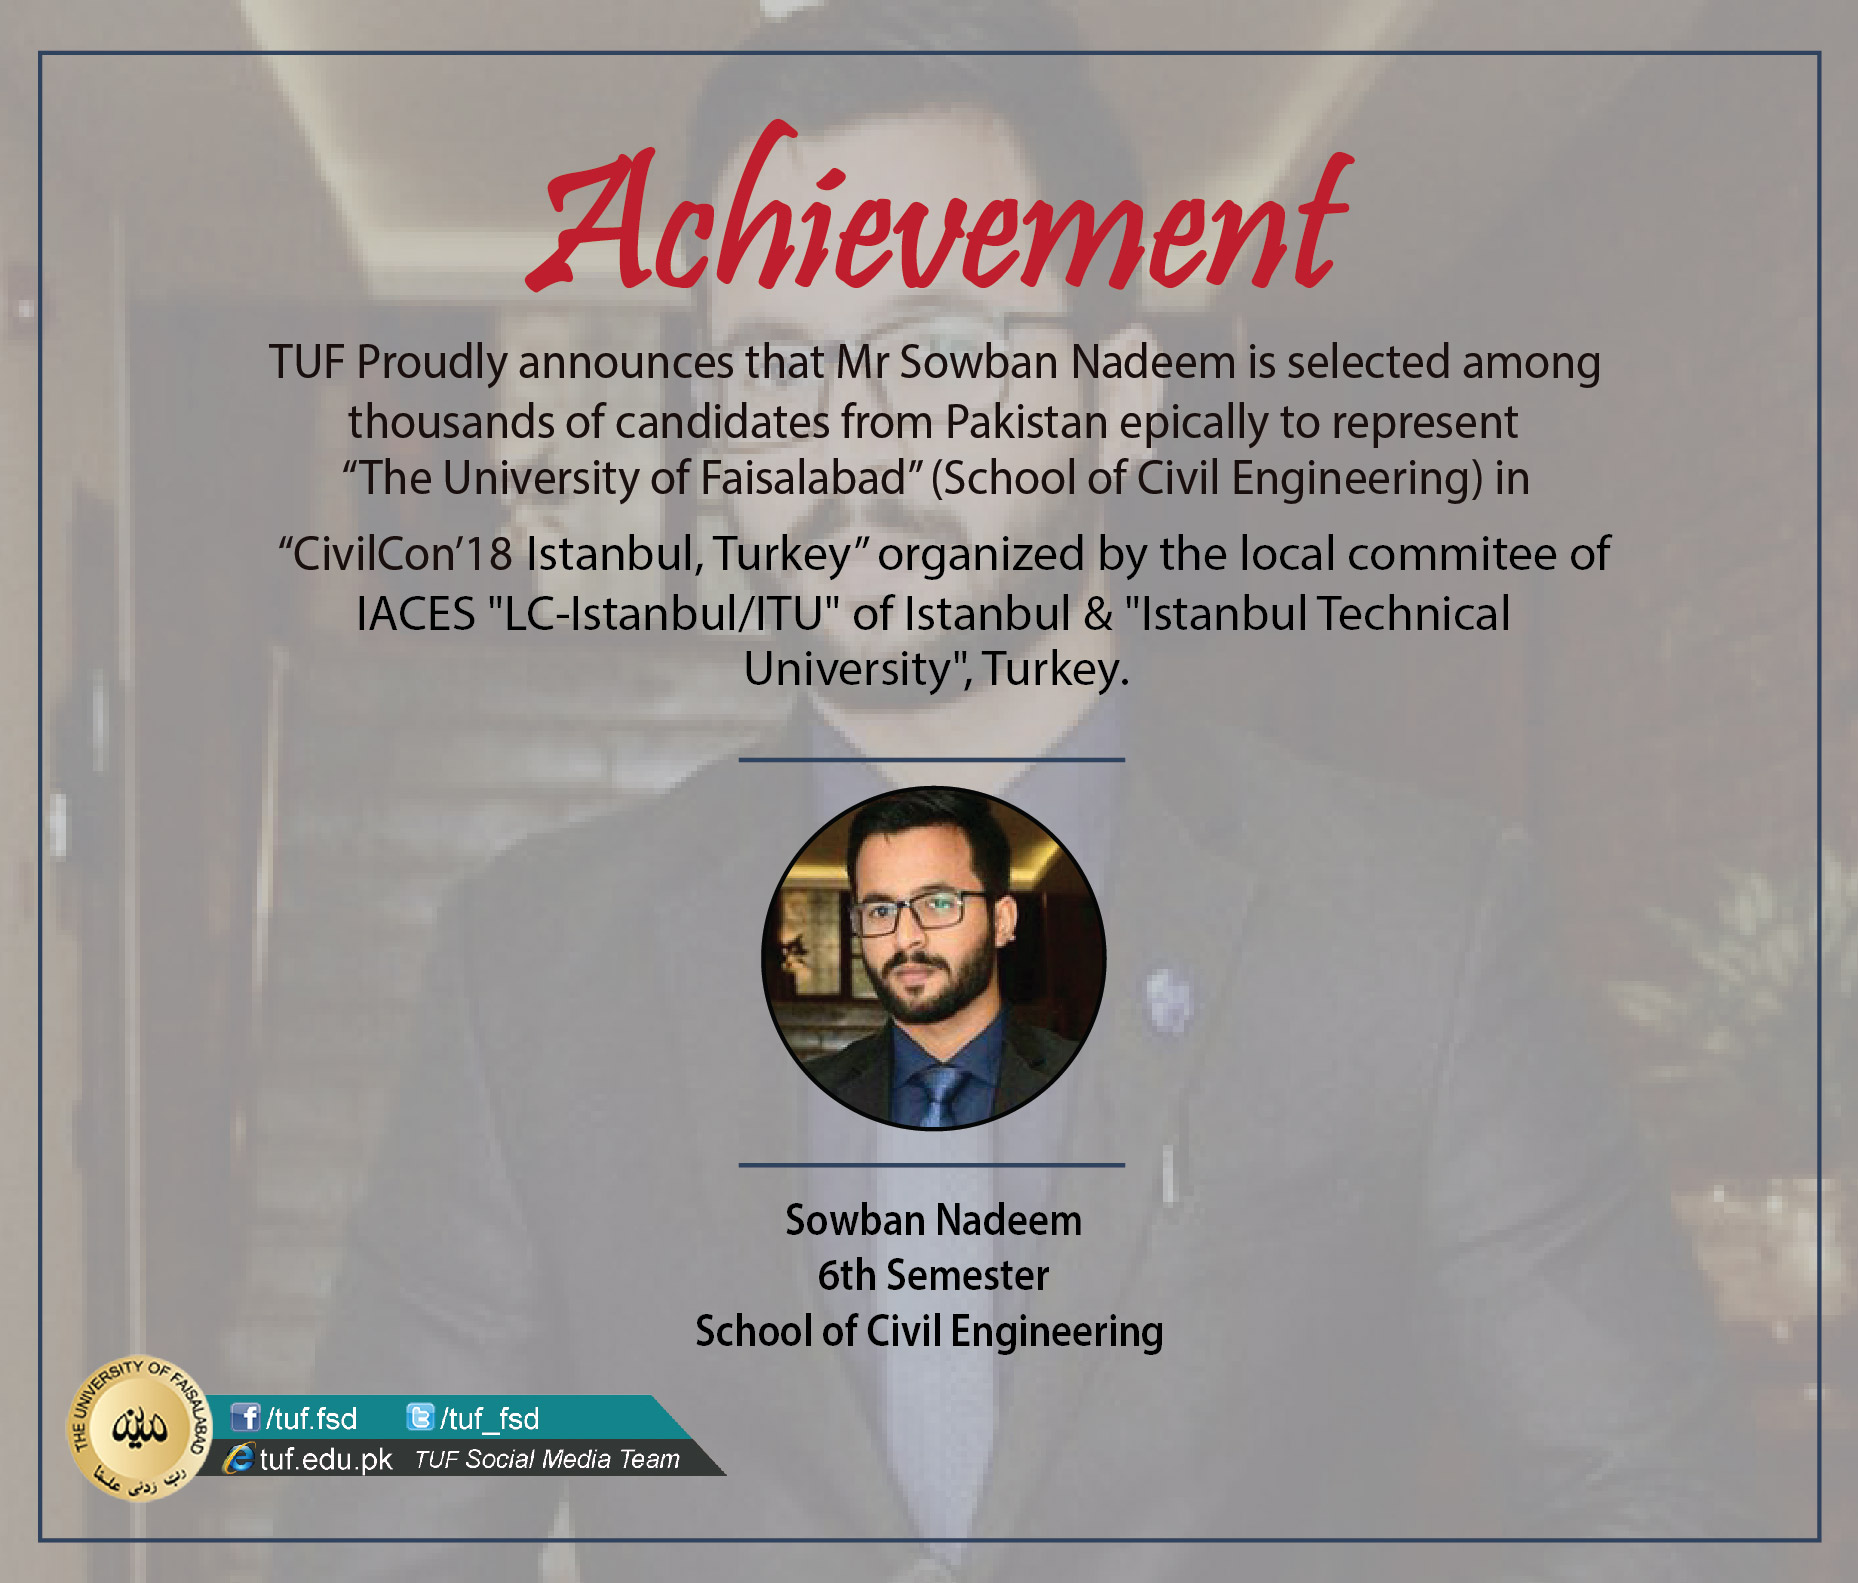 TUF student Mr Sowban Nadeem is selected in "CivilCon'18 Istanbul, Turkey" to represent The University of Faisalabad